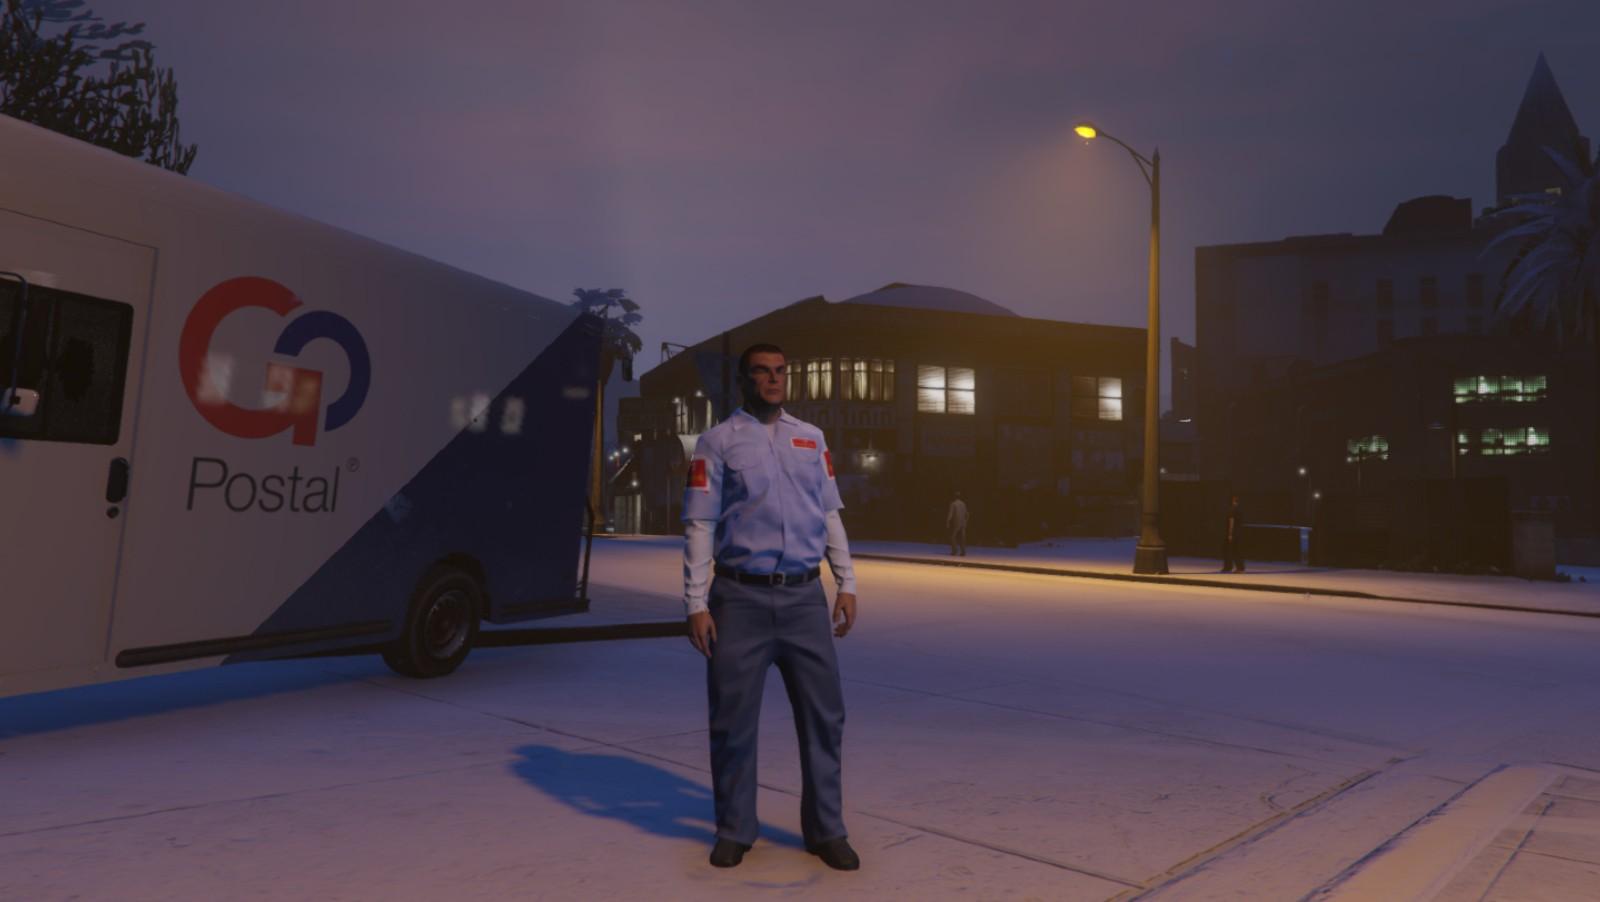 An image of a character in a GTA RP online server